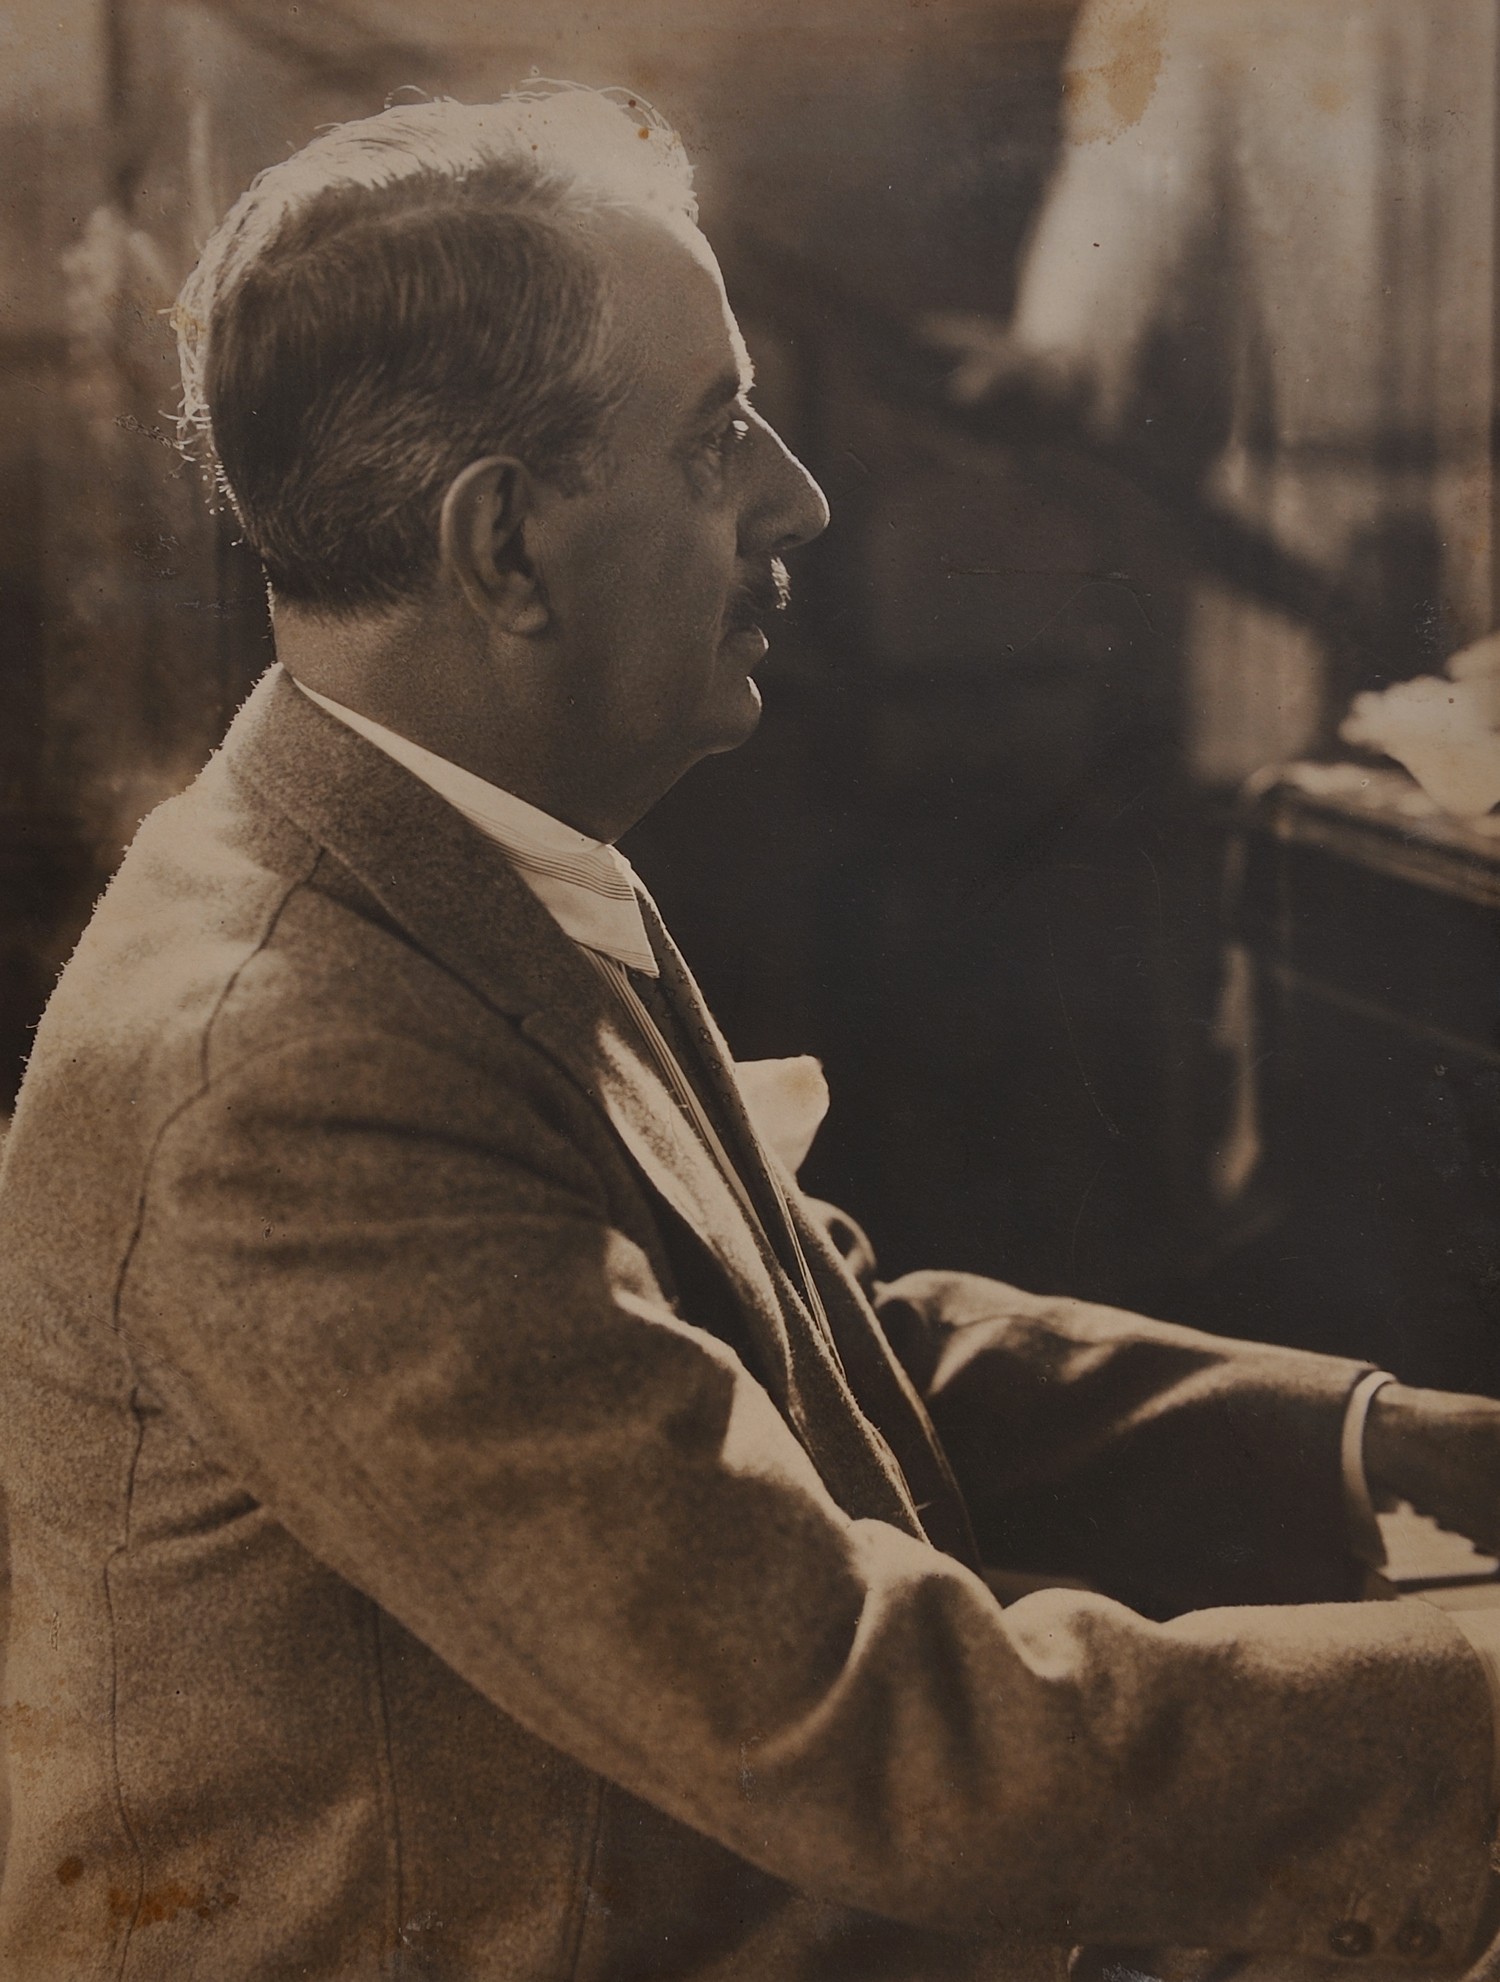 Puccini at the time of composition of Turandot (1924).